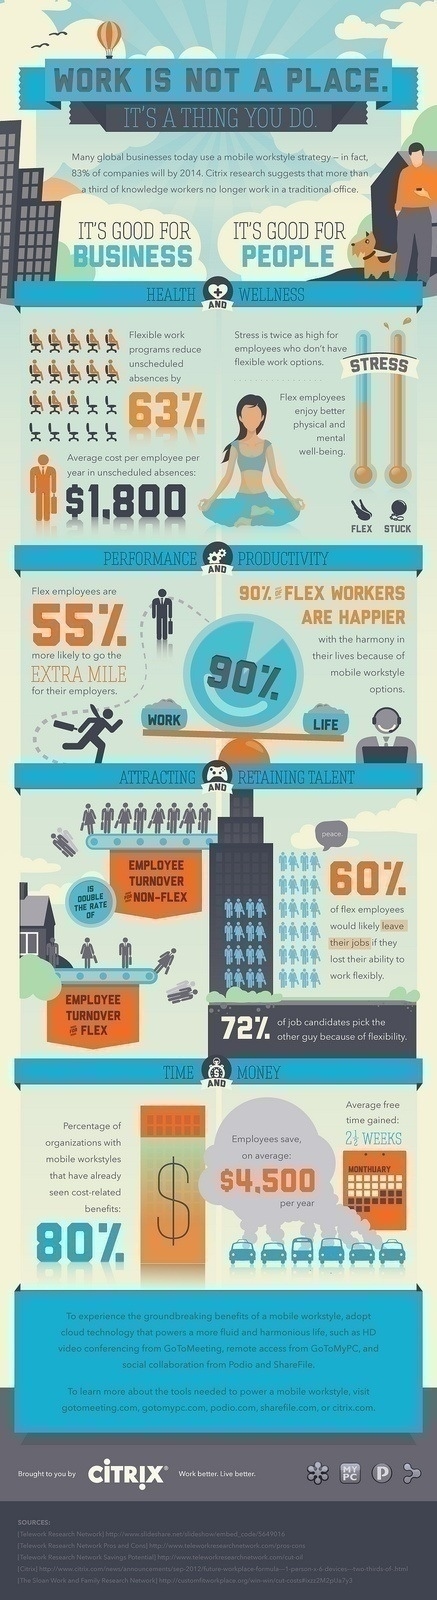 Work is not a place infographic